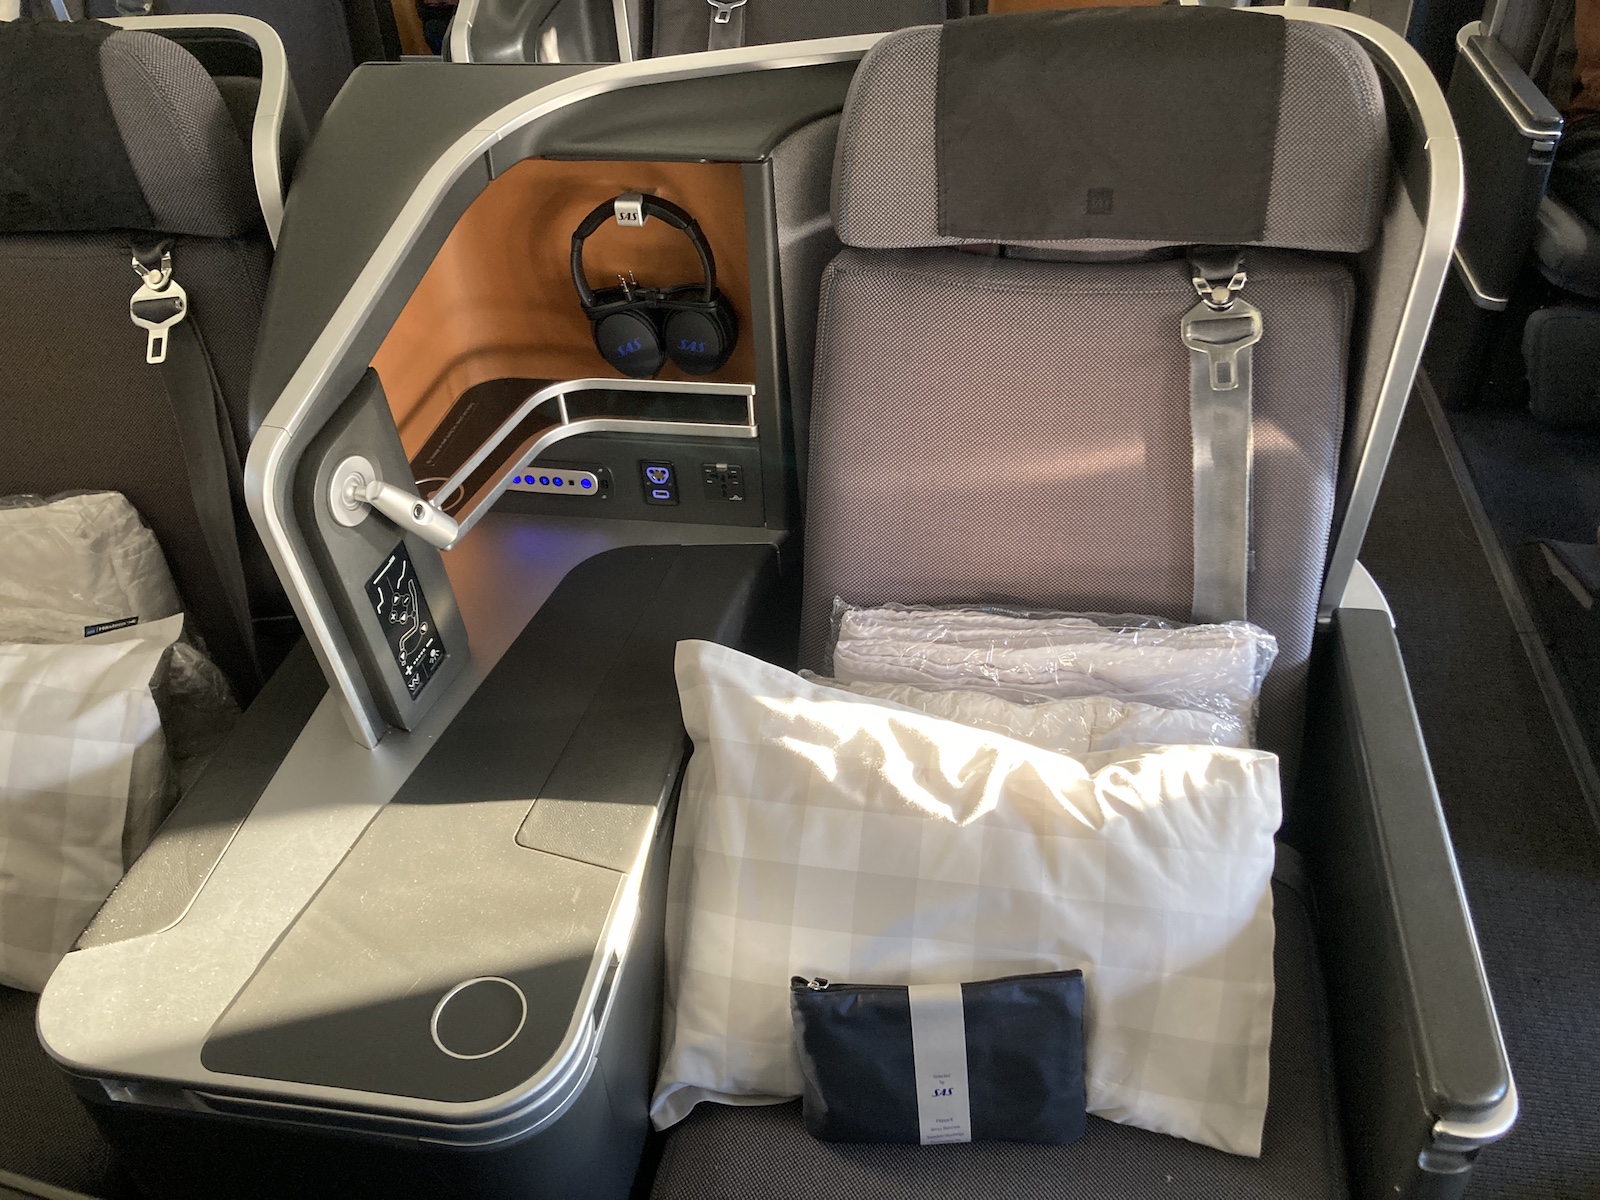 Image of SAS A330 business class seat